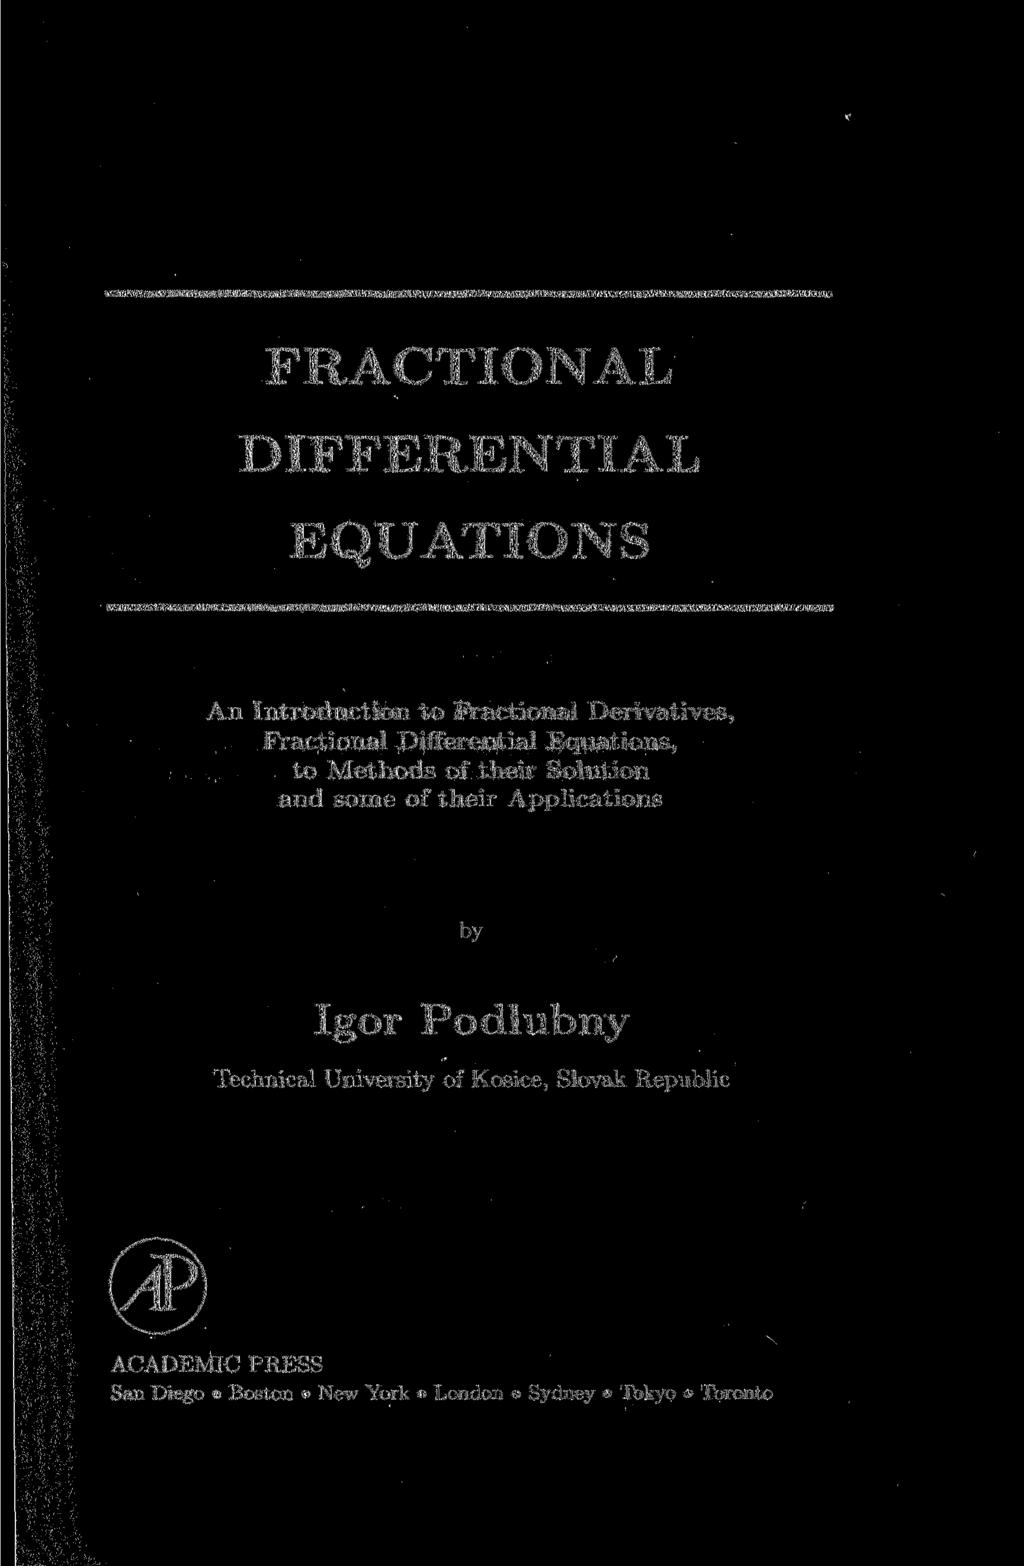 FRACTIONAL DIFFERENTIAL EQUATIONS An Introduction to Fractional Derivatives, Fractional Differential Equations, to Methods of their Solution and some of